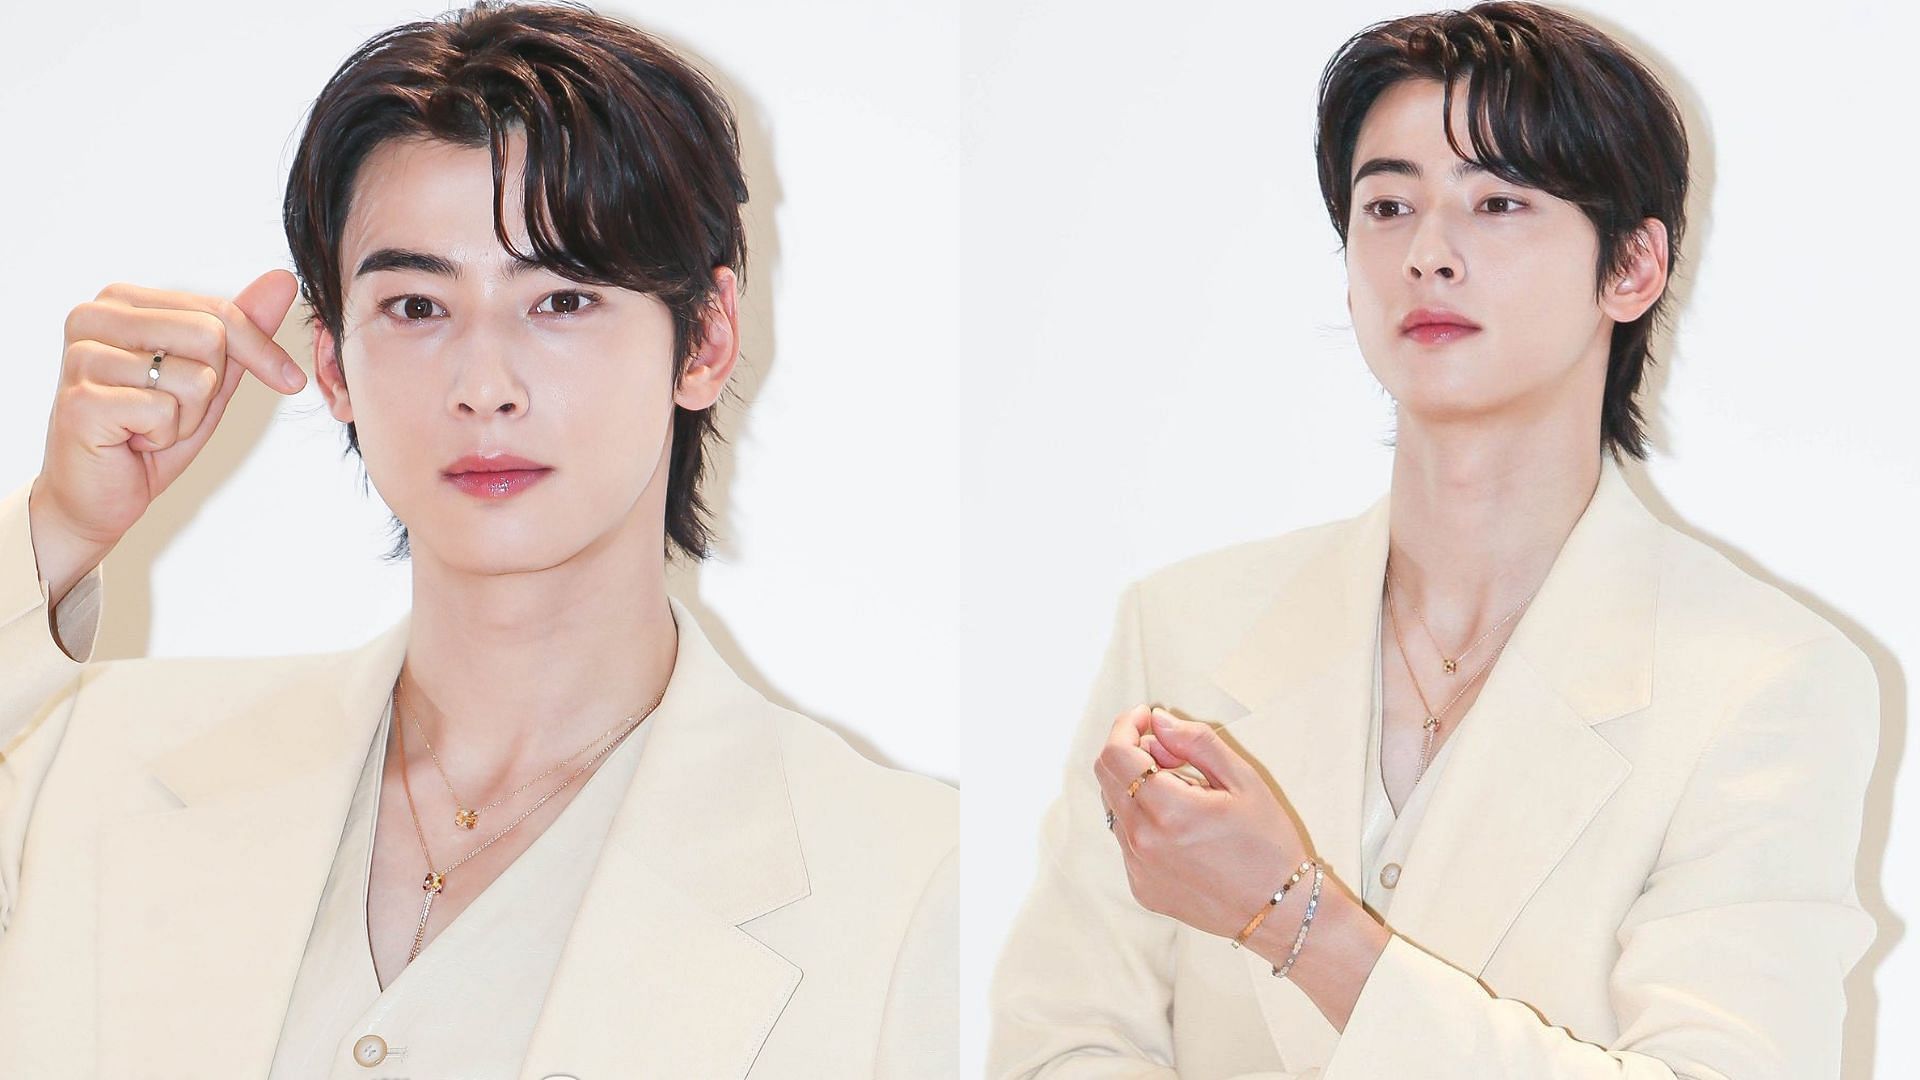 Chaumet Ambassador Cha Eunwoo who attended Chaumet event in real time –  Pannkpop